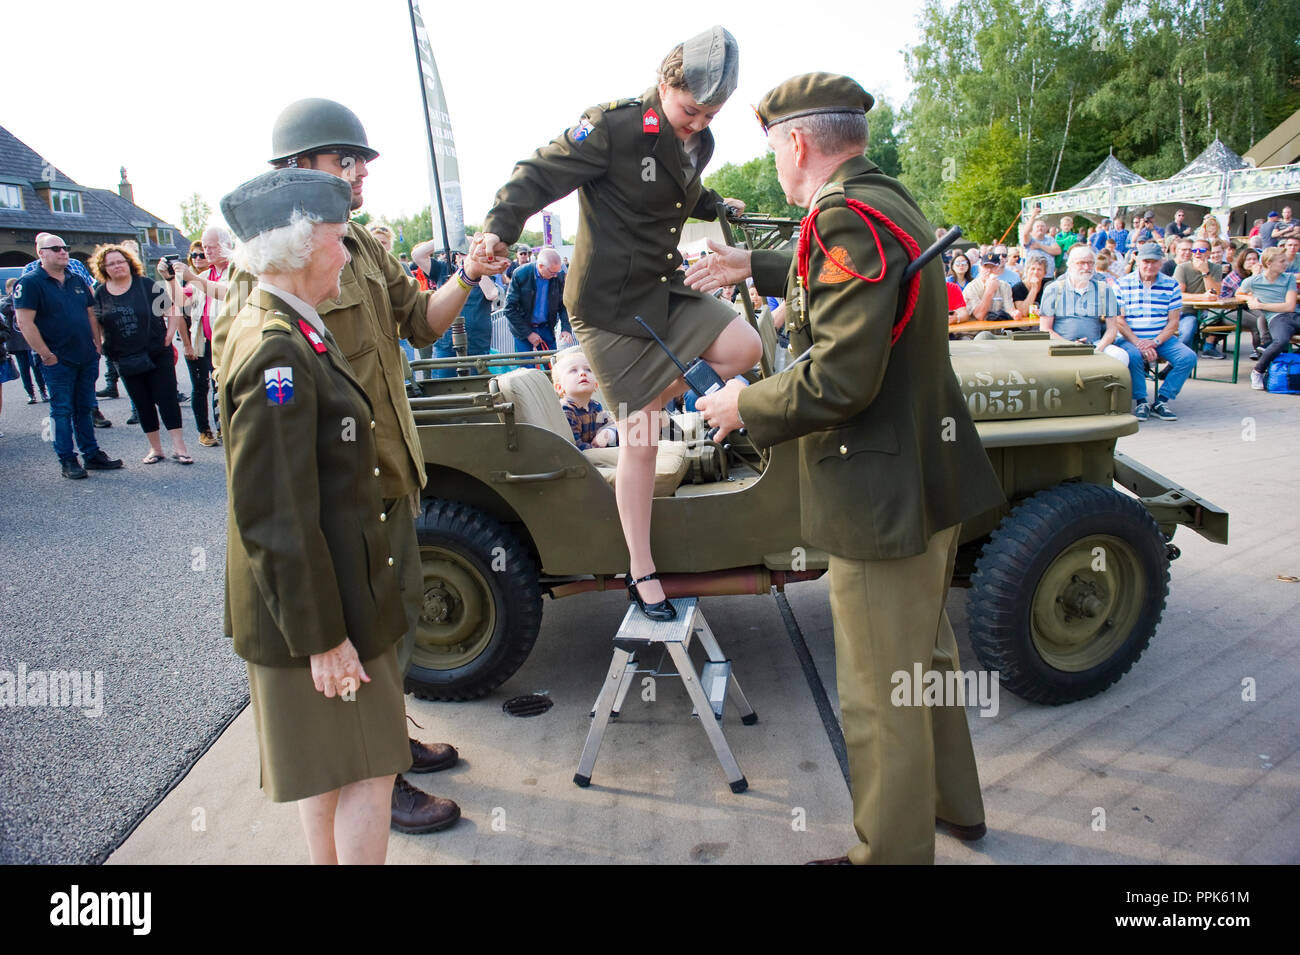 ENSCHEDE, THE NETHERLANDS - 01 SEPT, 2018: A singer from 'Sgt. Wilson's army show' stepping out of a jeep during a military army show. Stock Photo